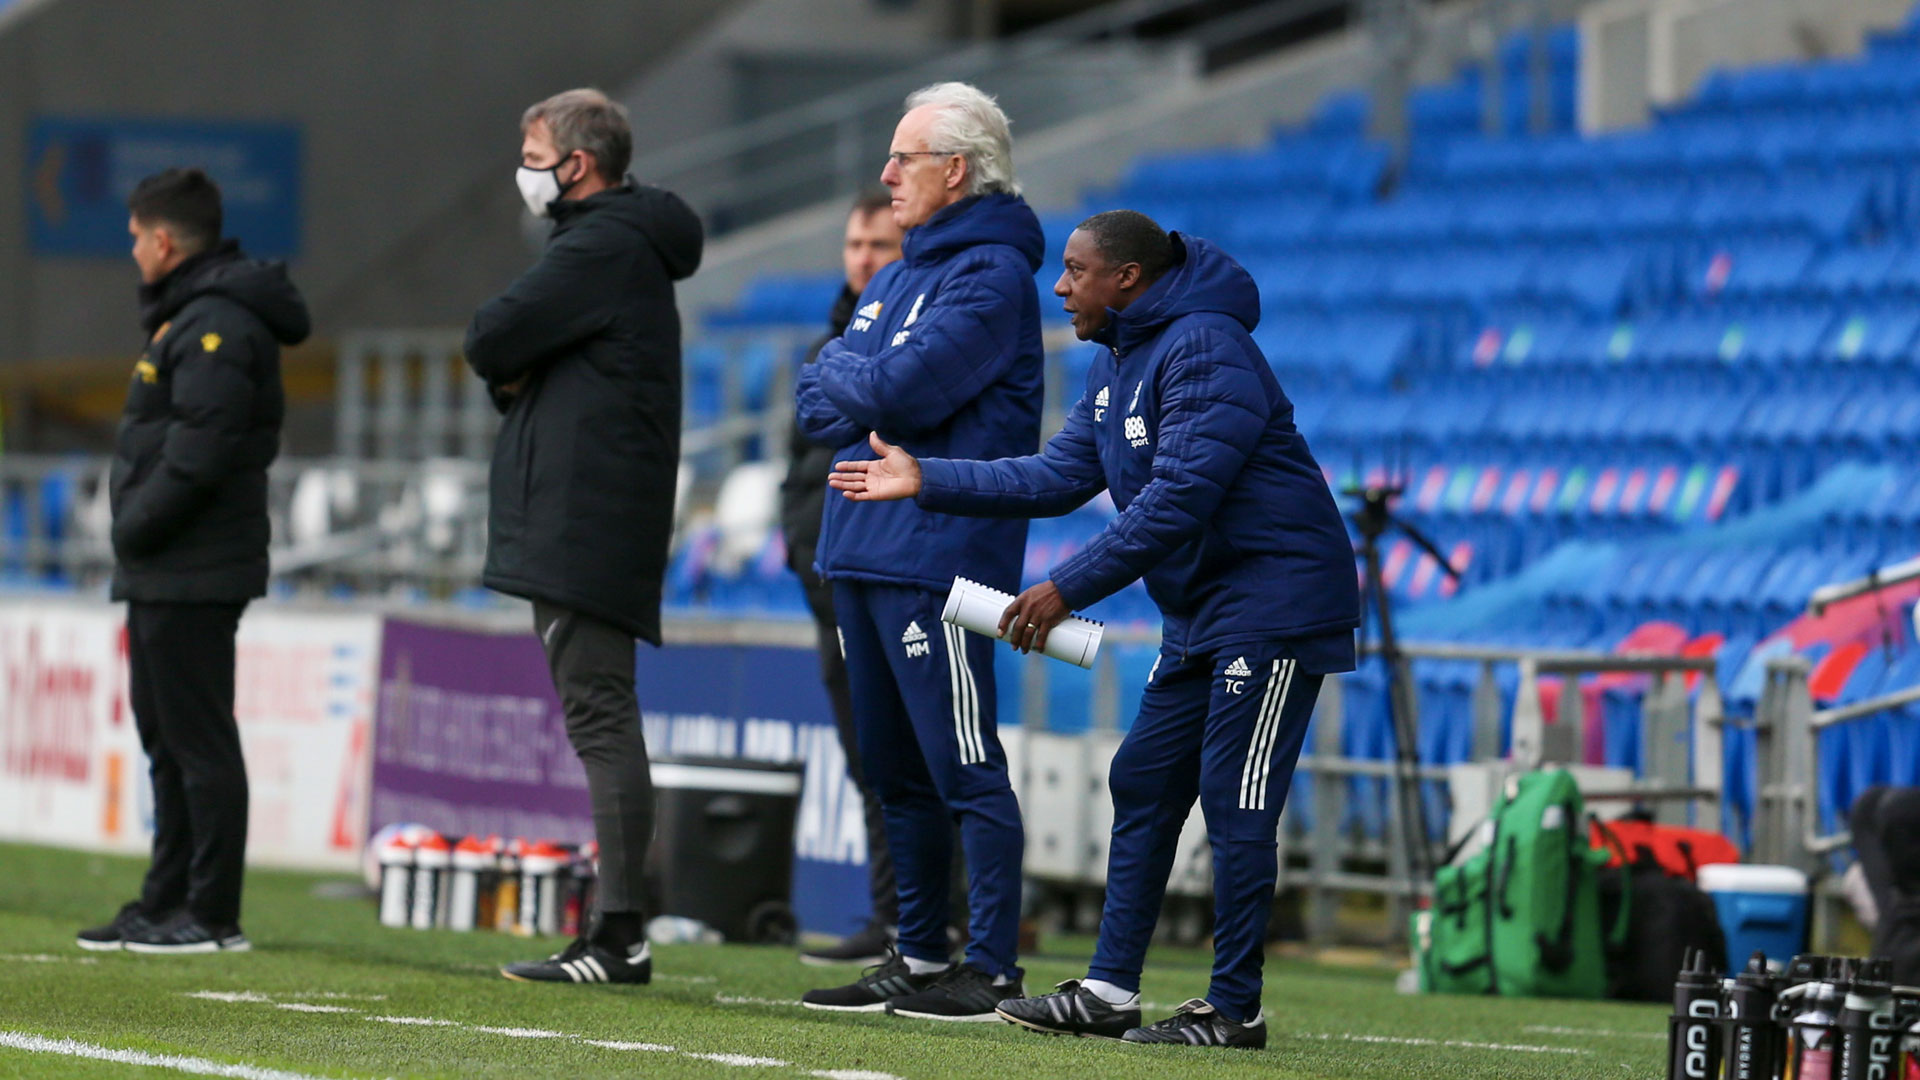 Mick and TC on the touchline at CCS...